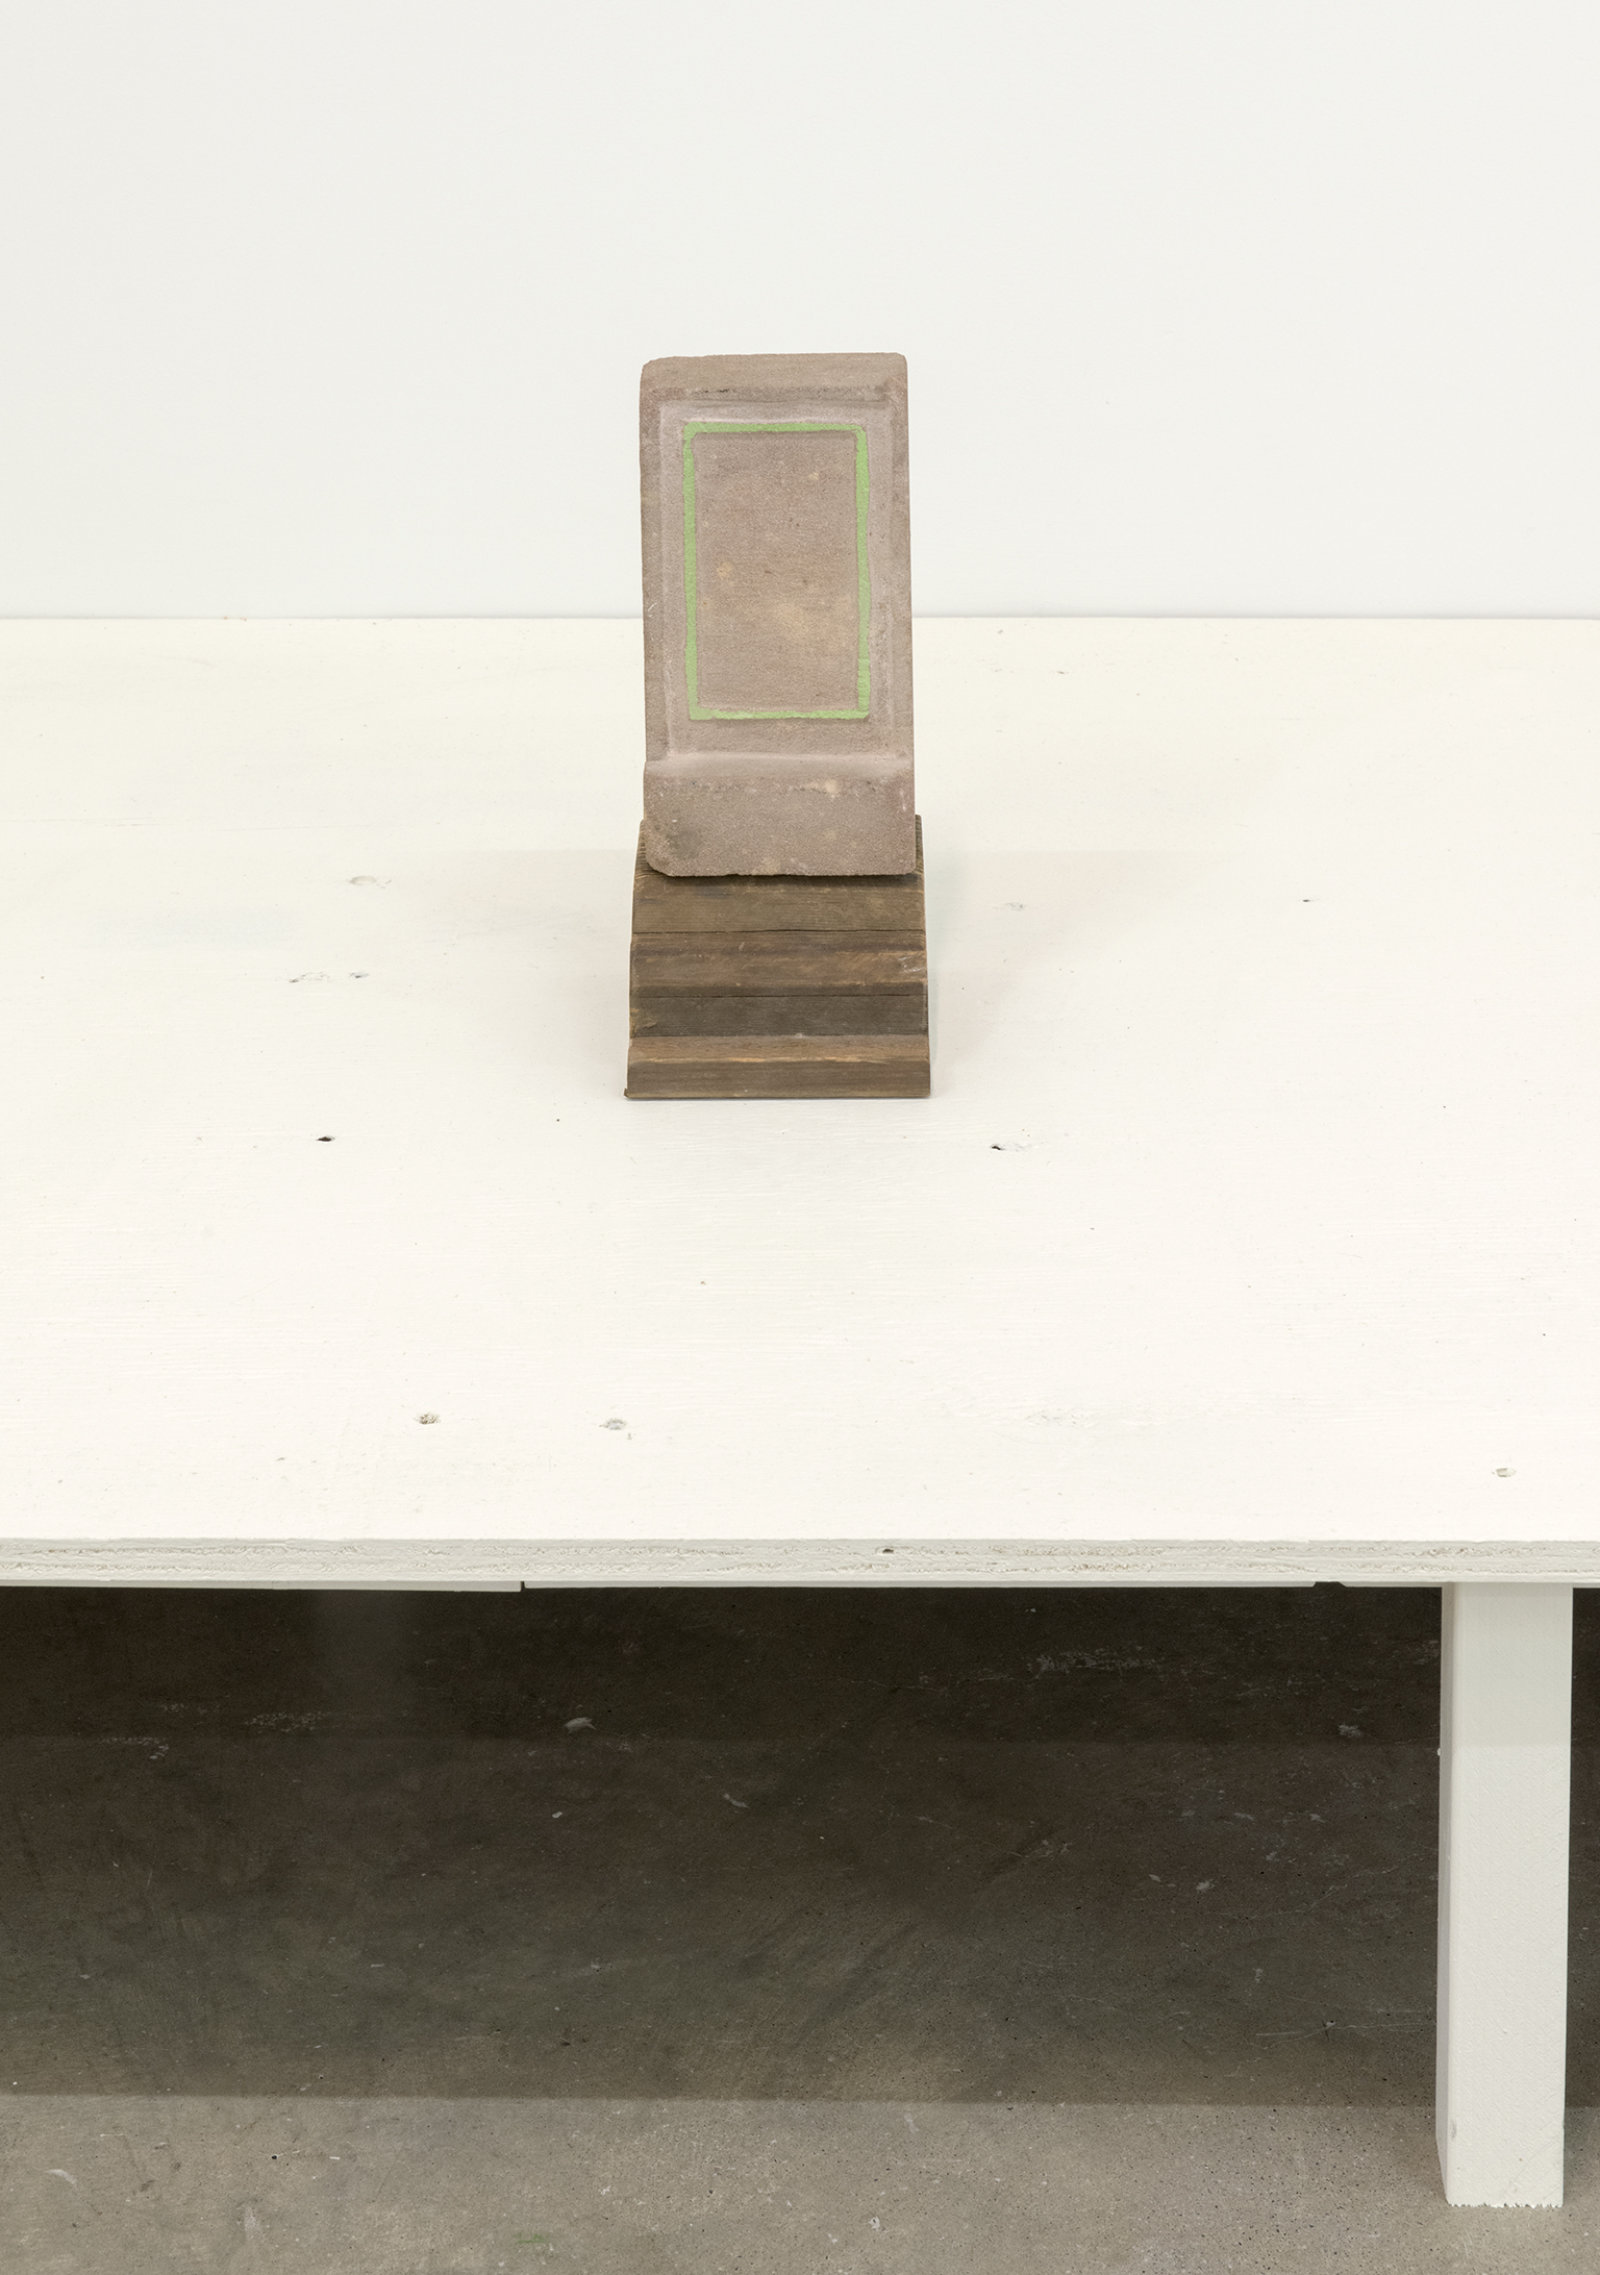 Ashes Withyman, nS05, 2013, brick, paint, wood, 12 x 5 x 5 in. (29 x 12 x 13 cm)  